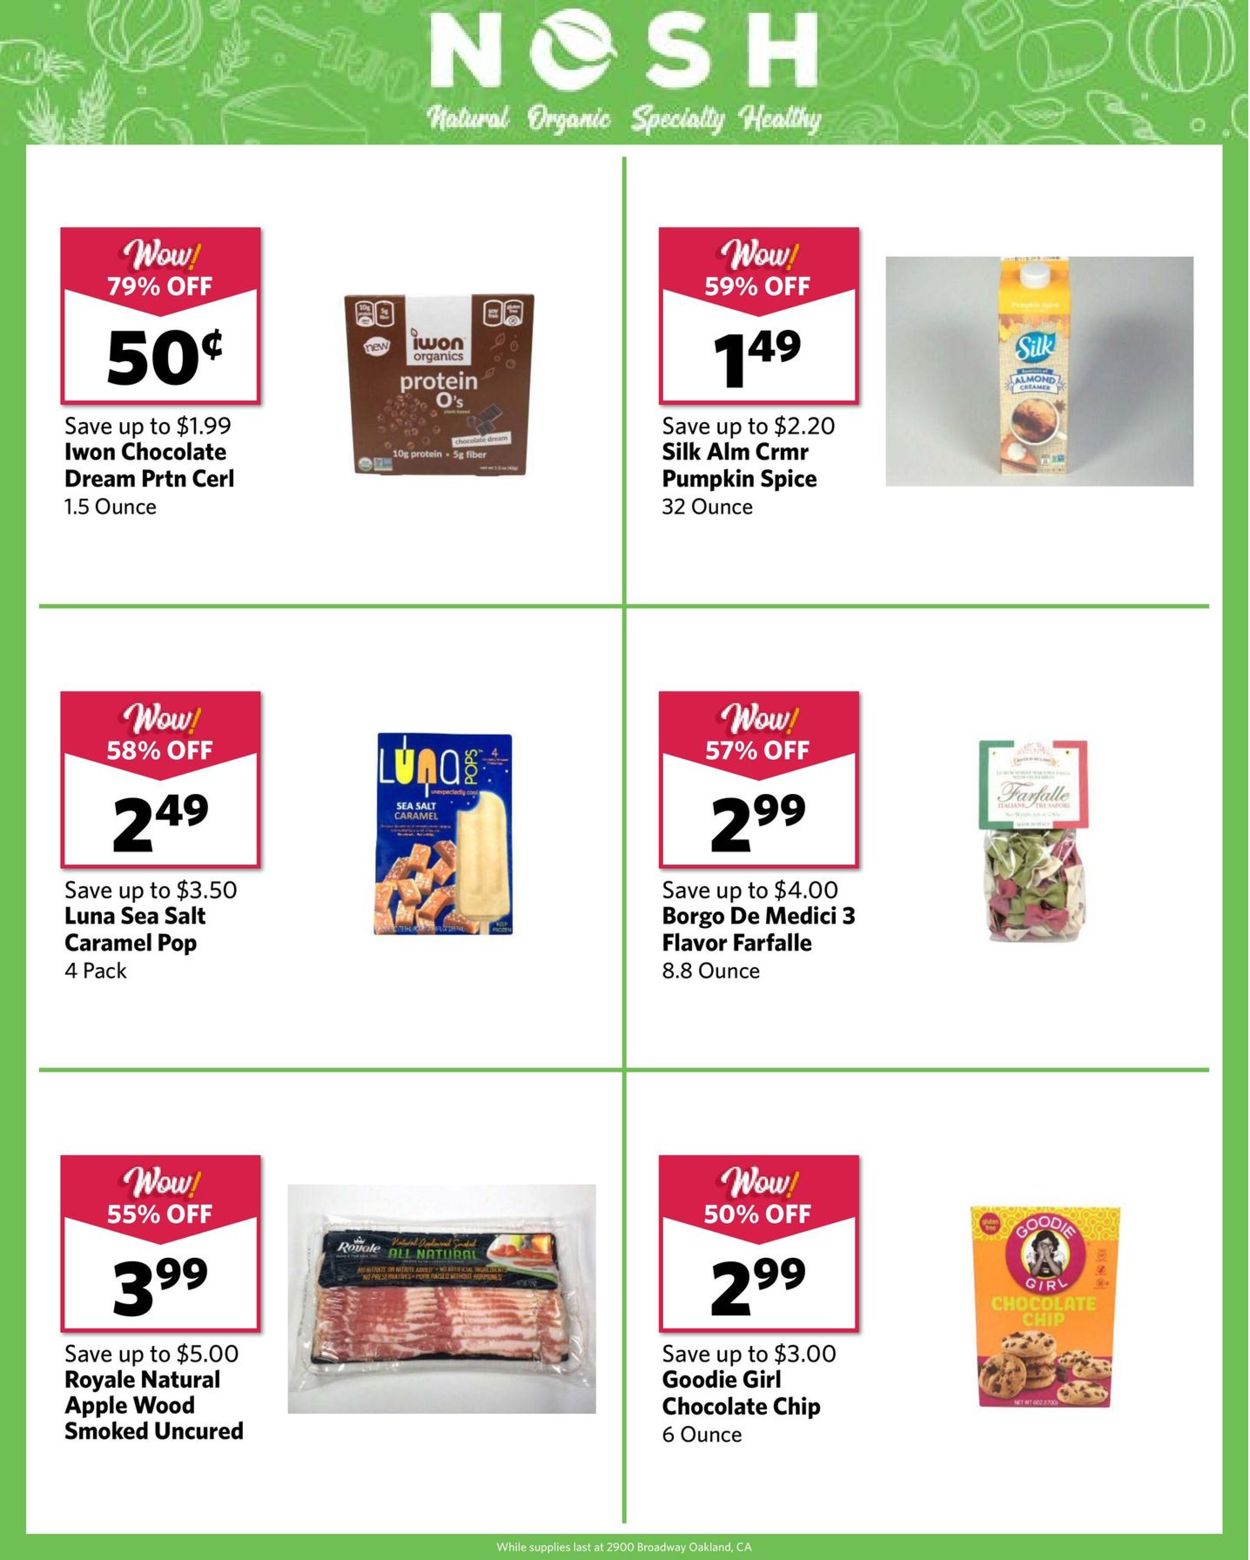 Grocery Outlet - Holiday Ad 2019 Weekly Ad Circular - valid 11/27-12/03/2019 (Page 10)